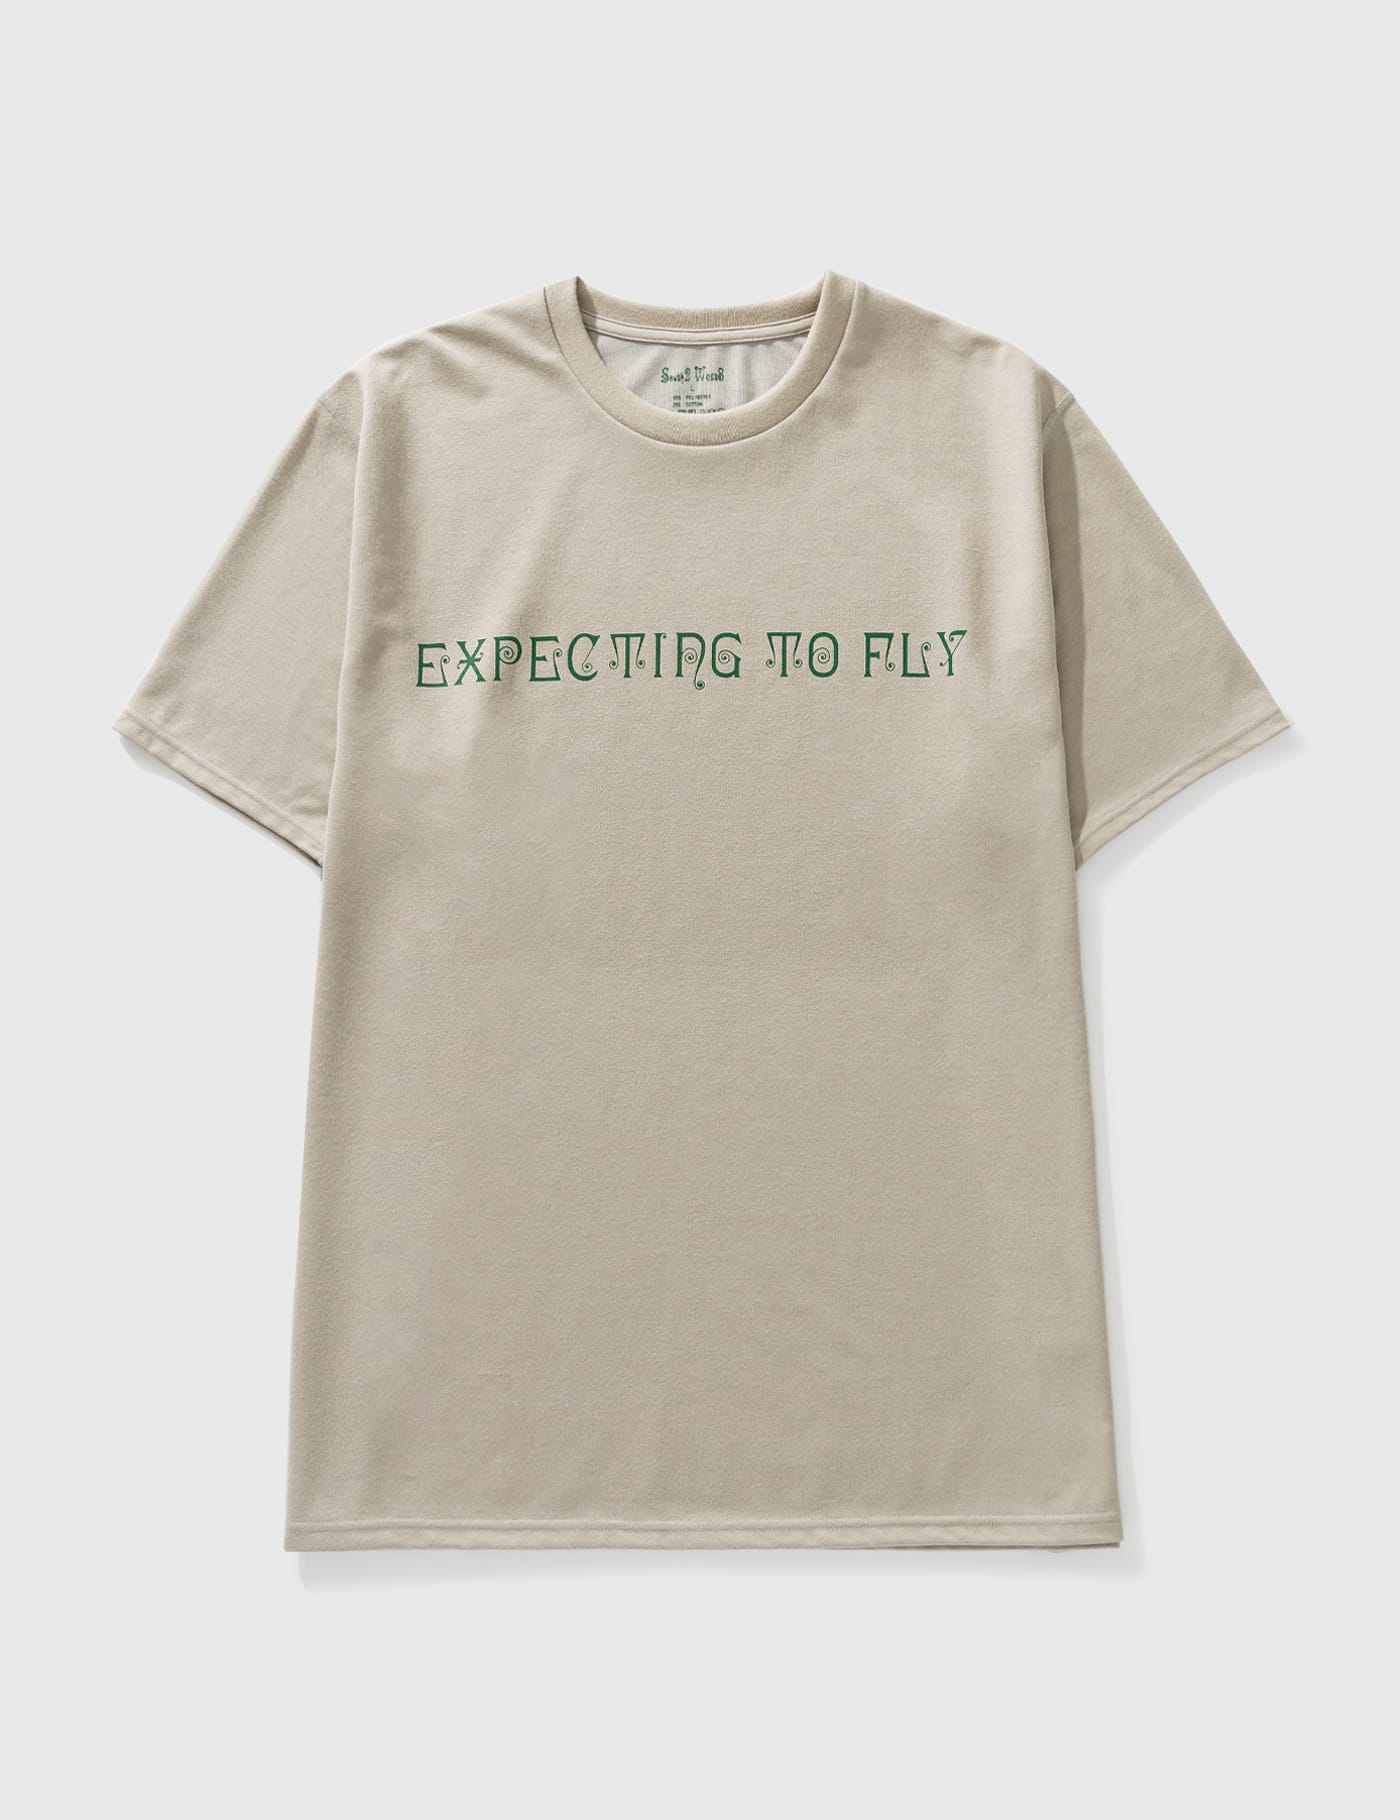 South2 West8 - Expecting to Fly T-shirt | HBX - Globally Curated